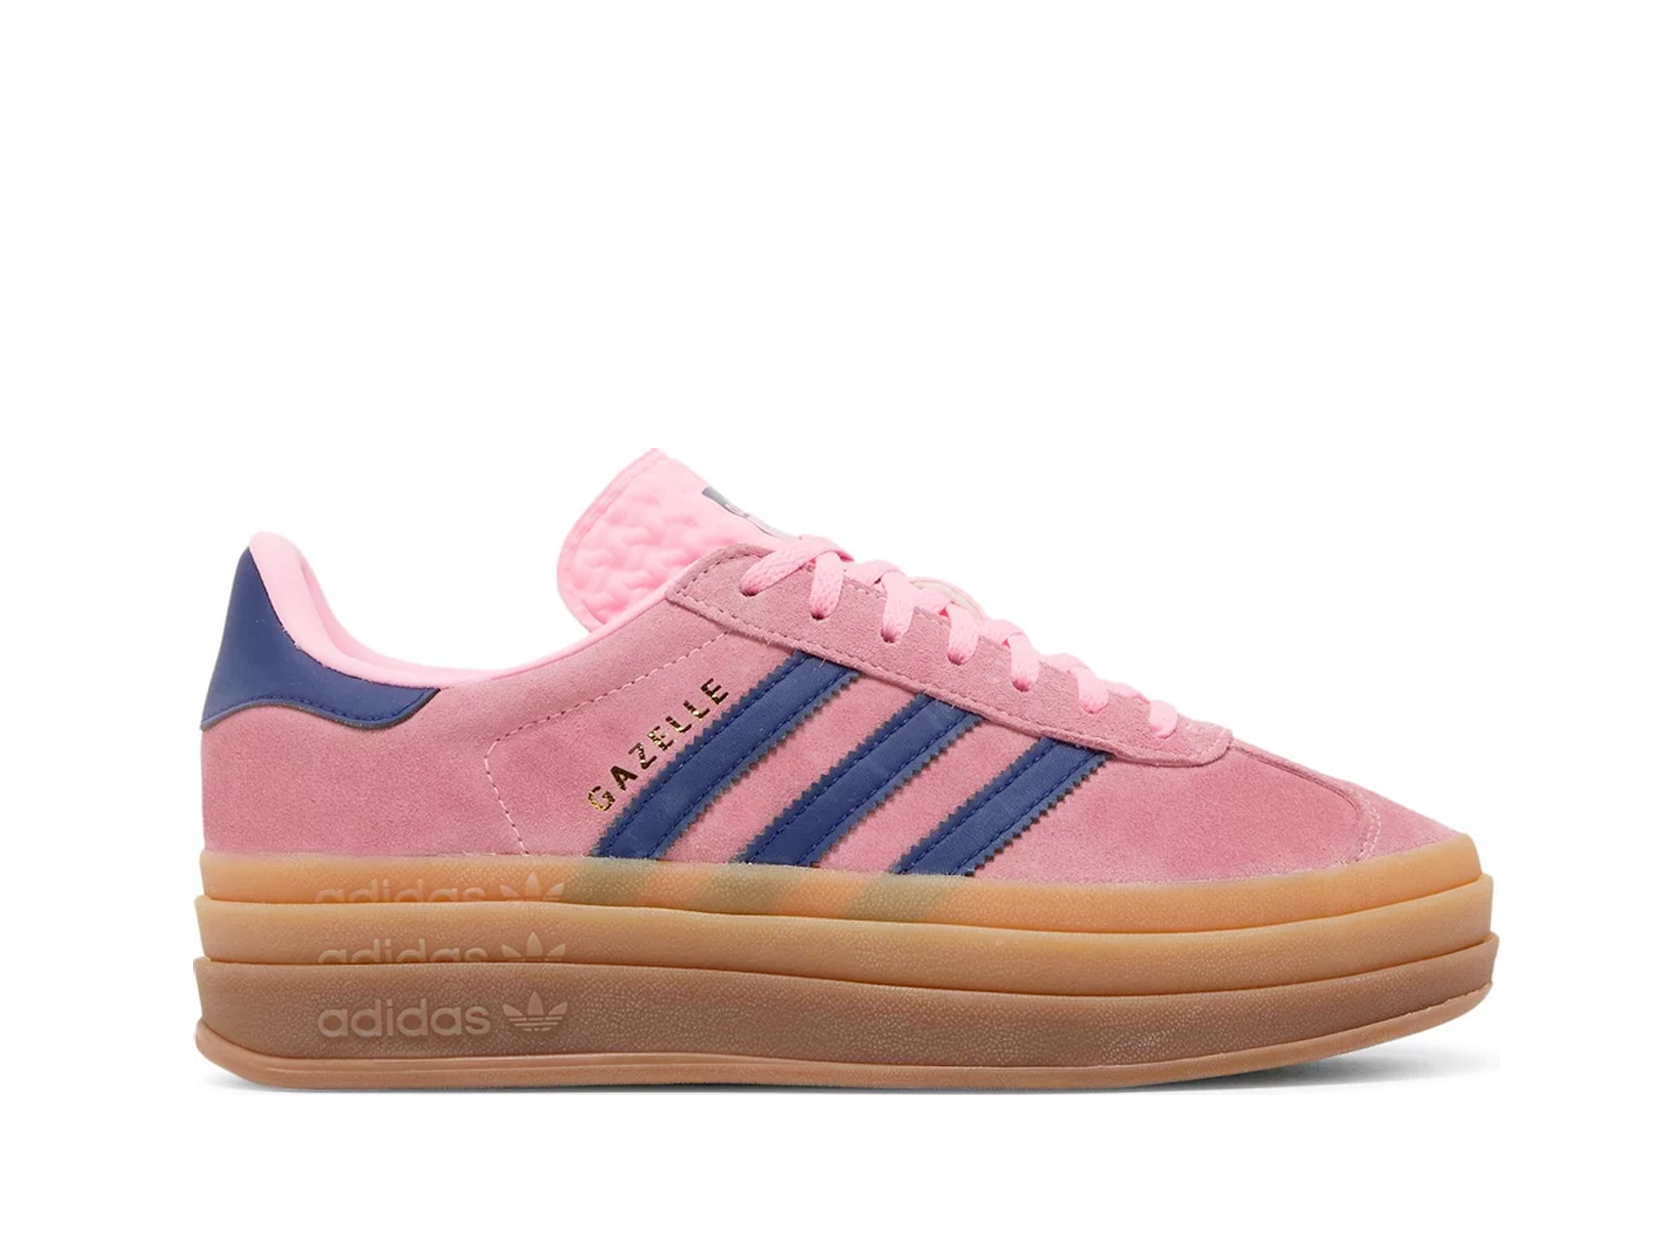 Double Boxed  149.99 Adidas Gazelle Bold Pink Glow Gum (W) Double Boxed